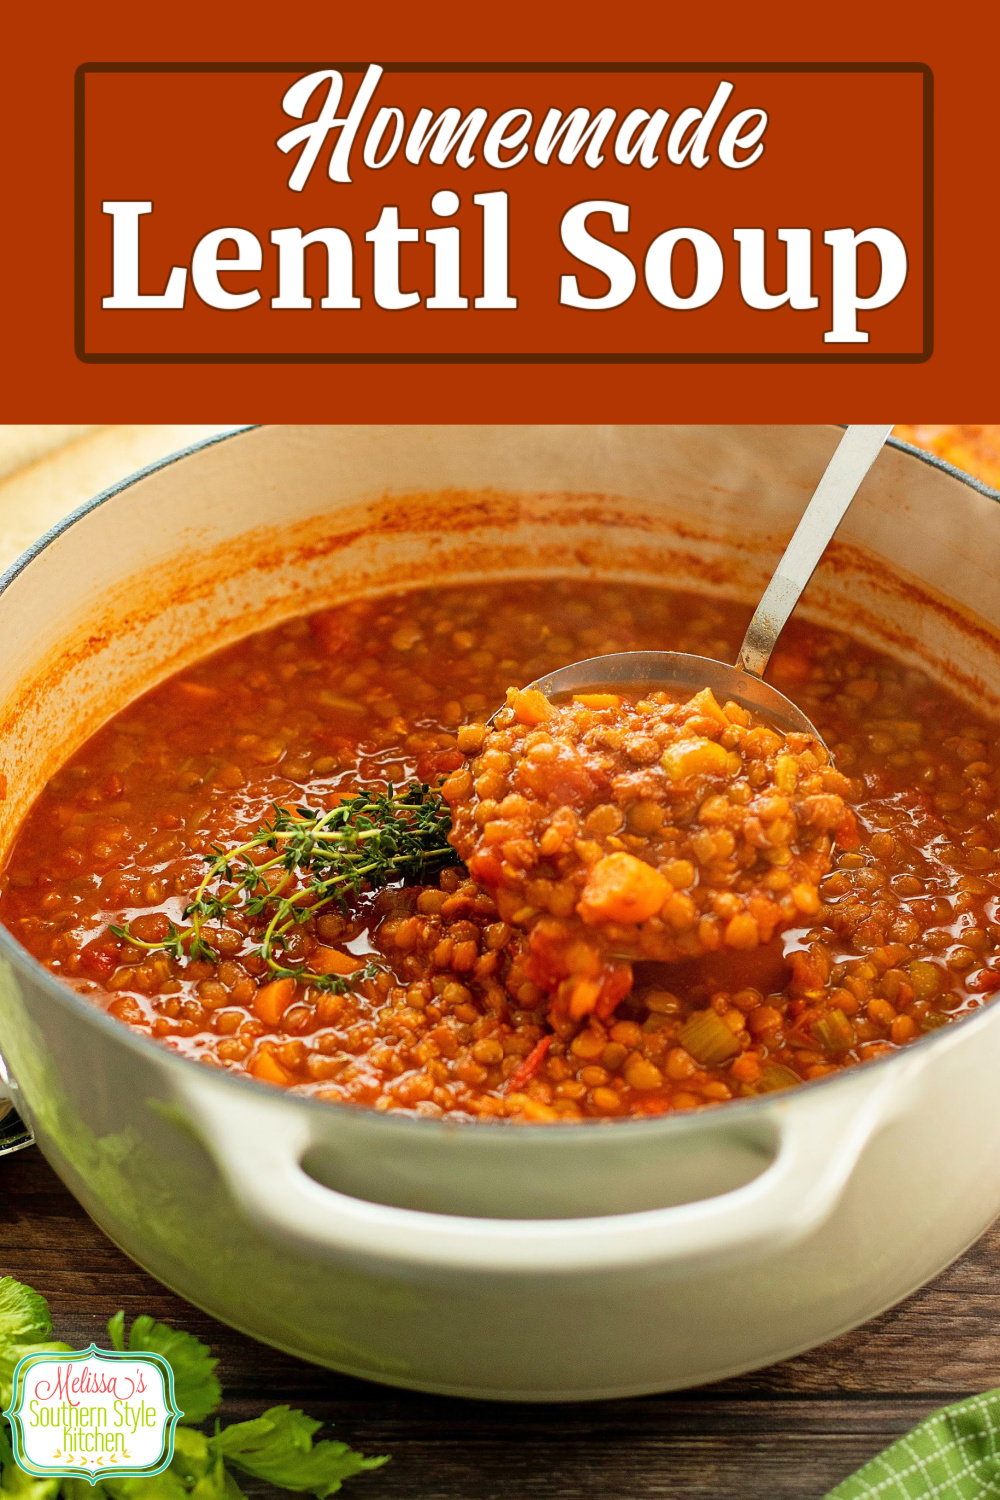 This Lentil Soup recipe is a filling dish that won't break the bank. Serve it with a side of crusty bread for dipping in the flavorful broth #lentils #lentilsoup #easysouprecipes #lentilrecipes #brownlentils #soup #souprecipes #lentilsouprecipe #brownlentilrecipes via @melissasssk